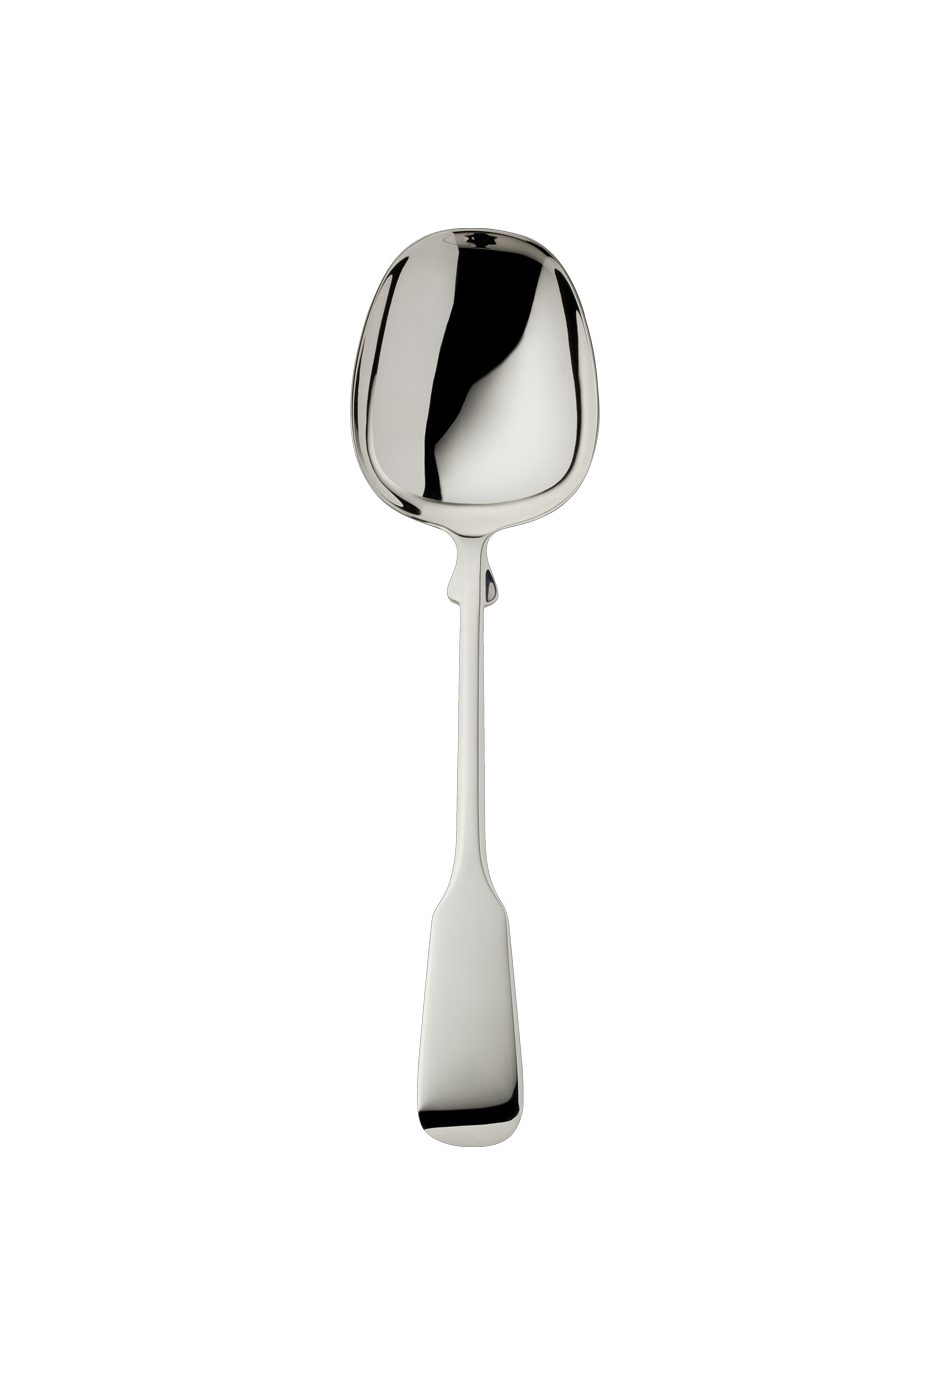 Spaten Compote/Salad Serving Spoon, large (925 Sterling Silver)